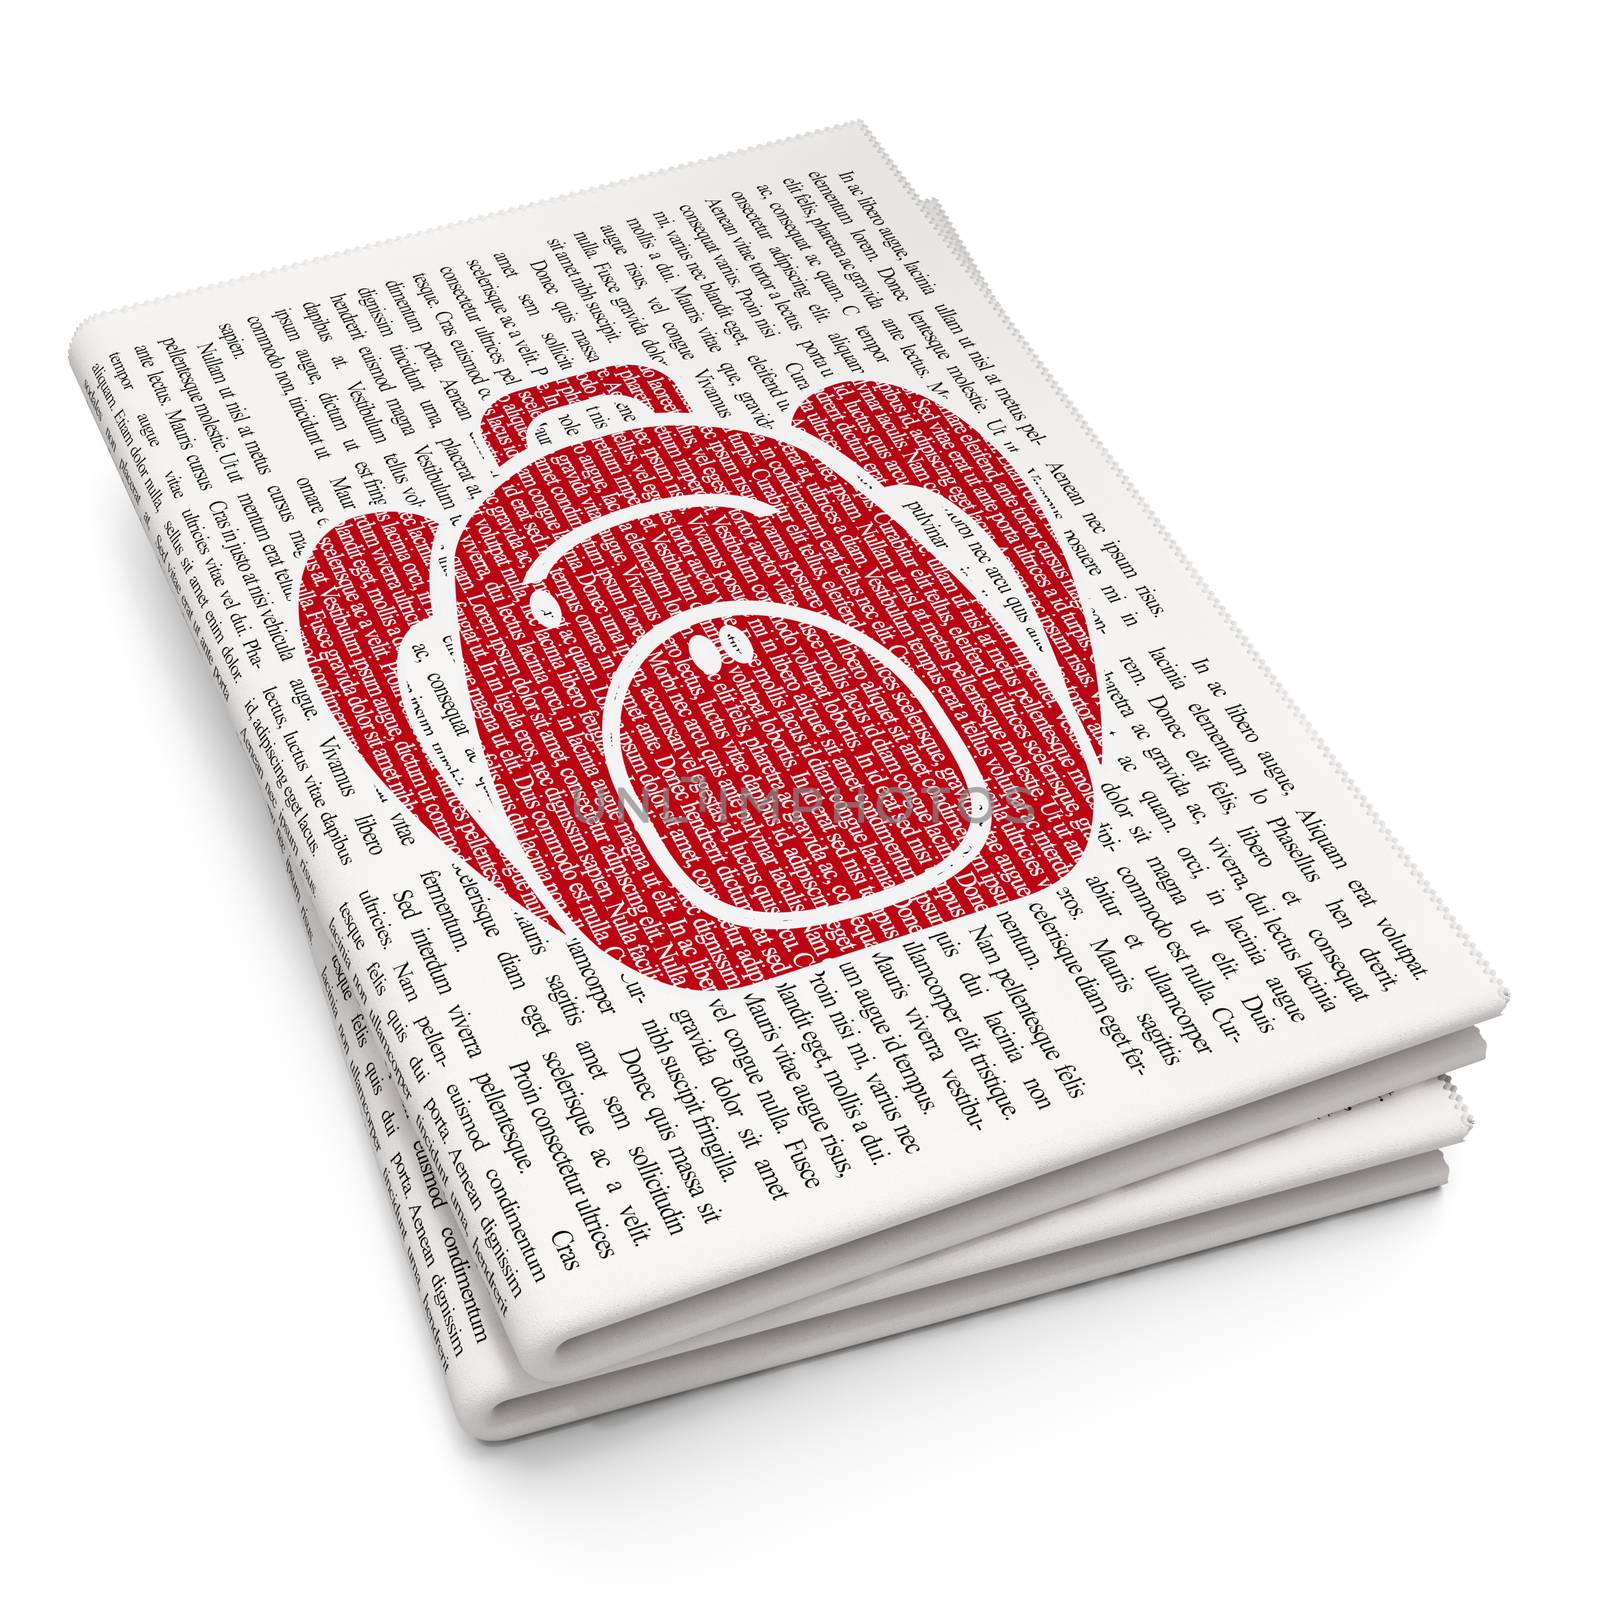 Vacation concept: Pixelated red Backpack icon on Newspaper background, 3D rendering